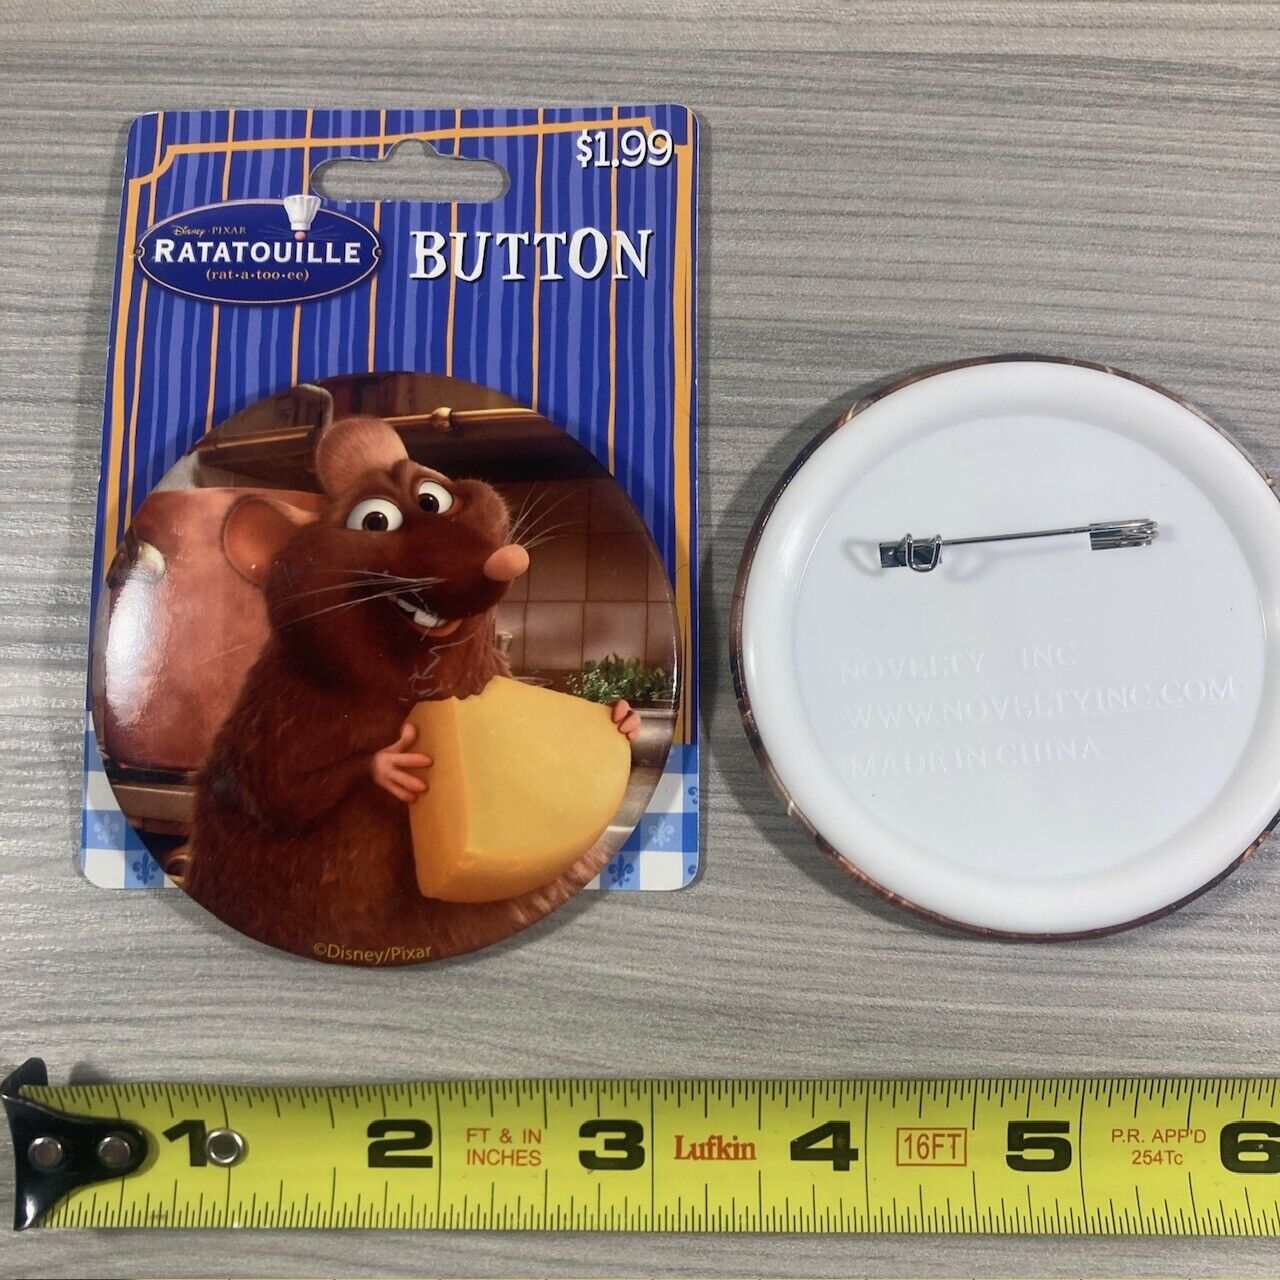 Disney Pixar Ratatouille Zipper-Pull Keychain Button Puzzle Stickers Clings New